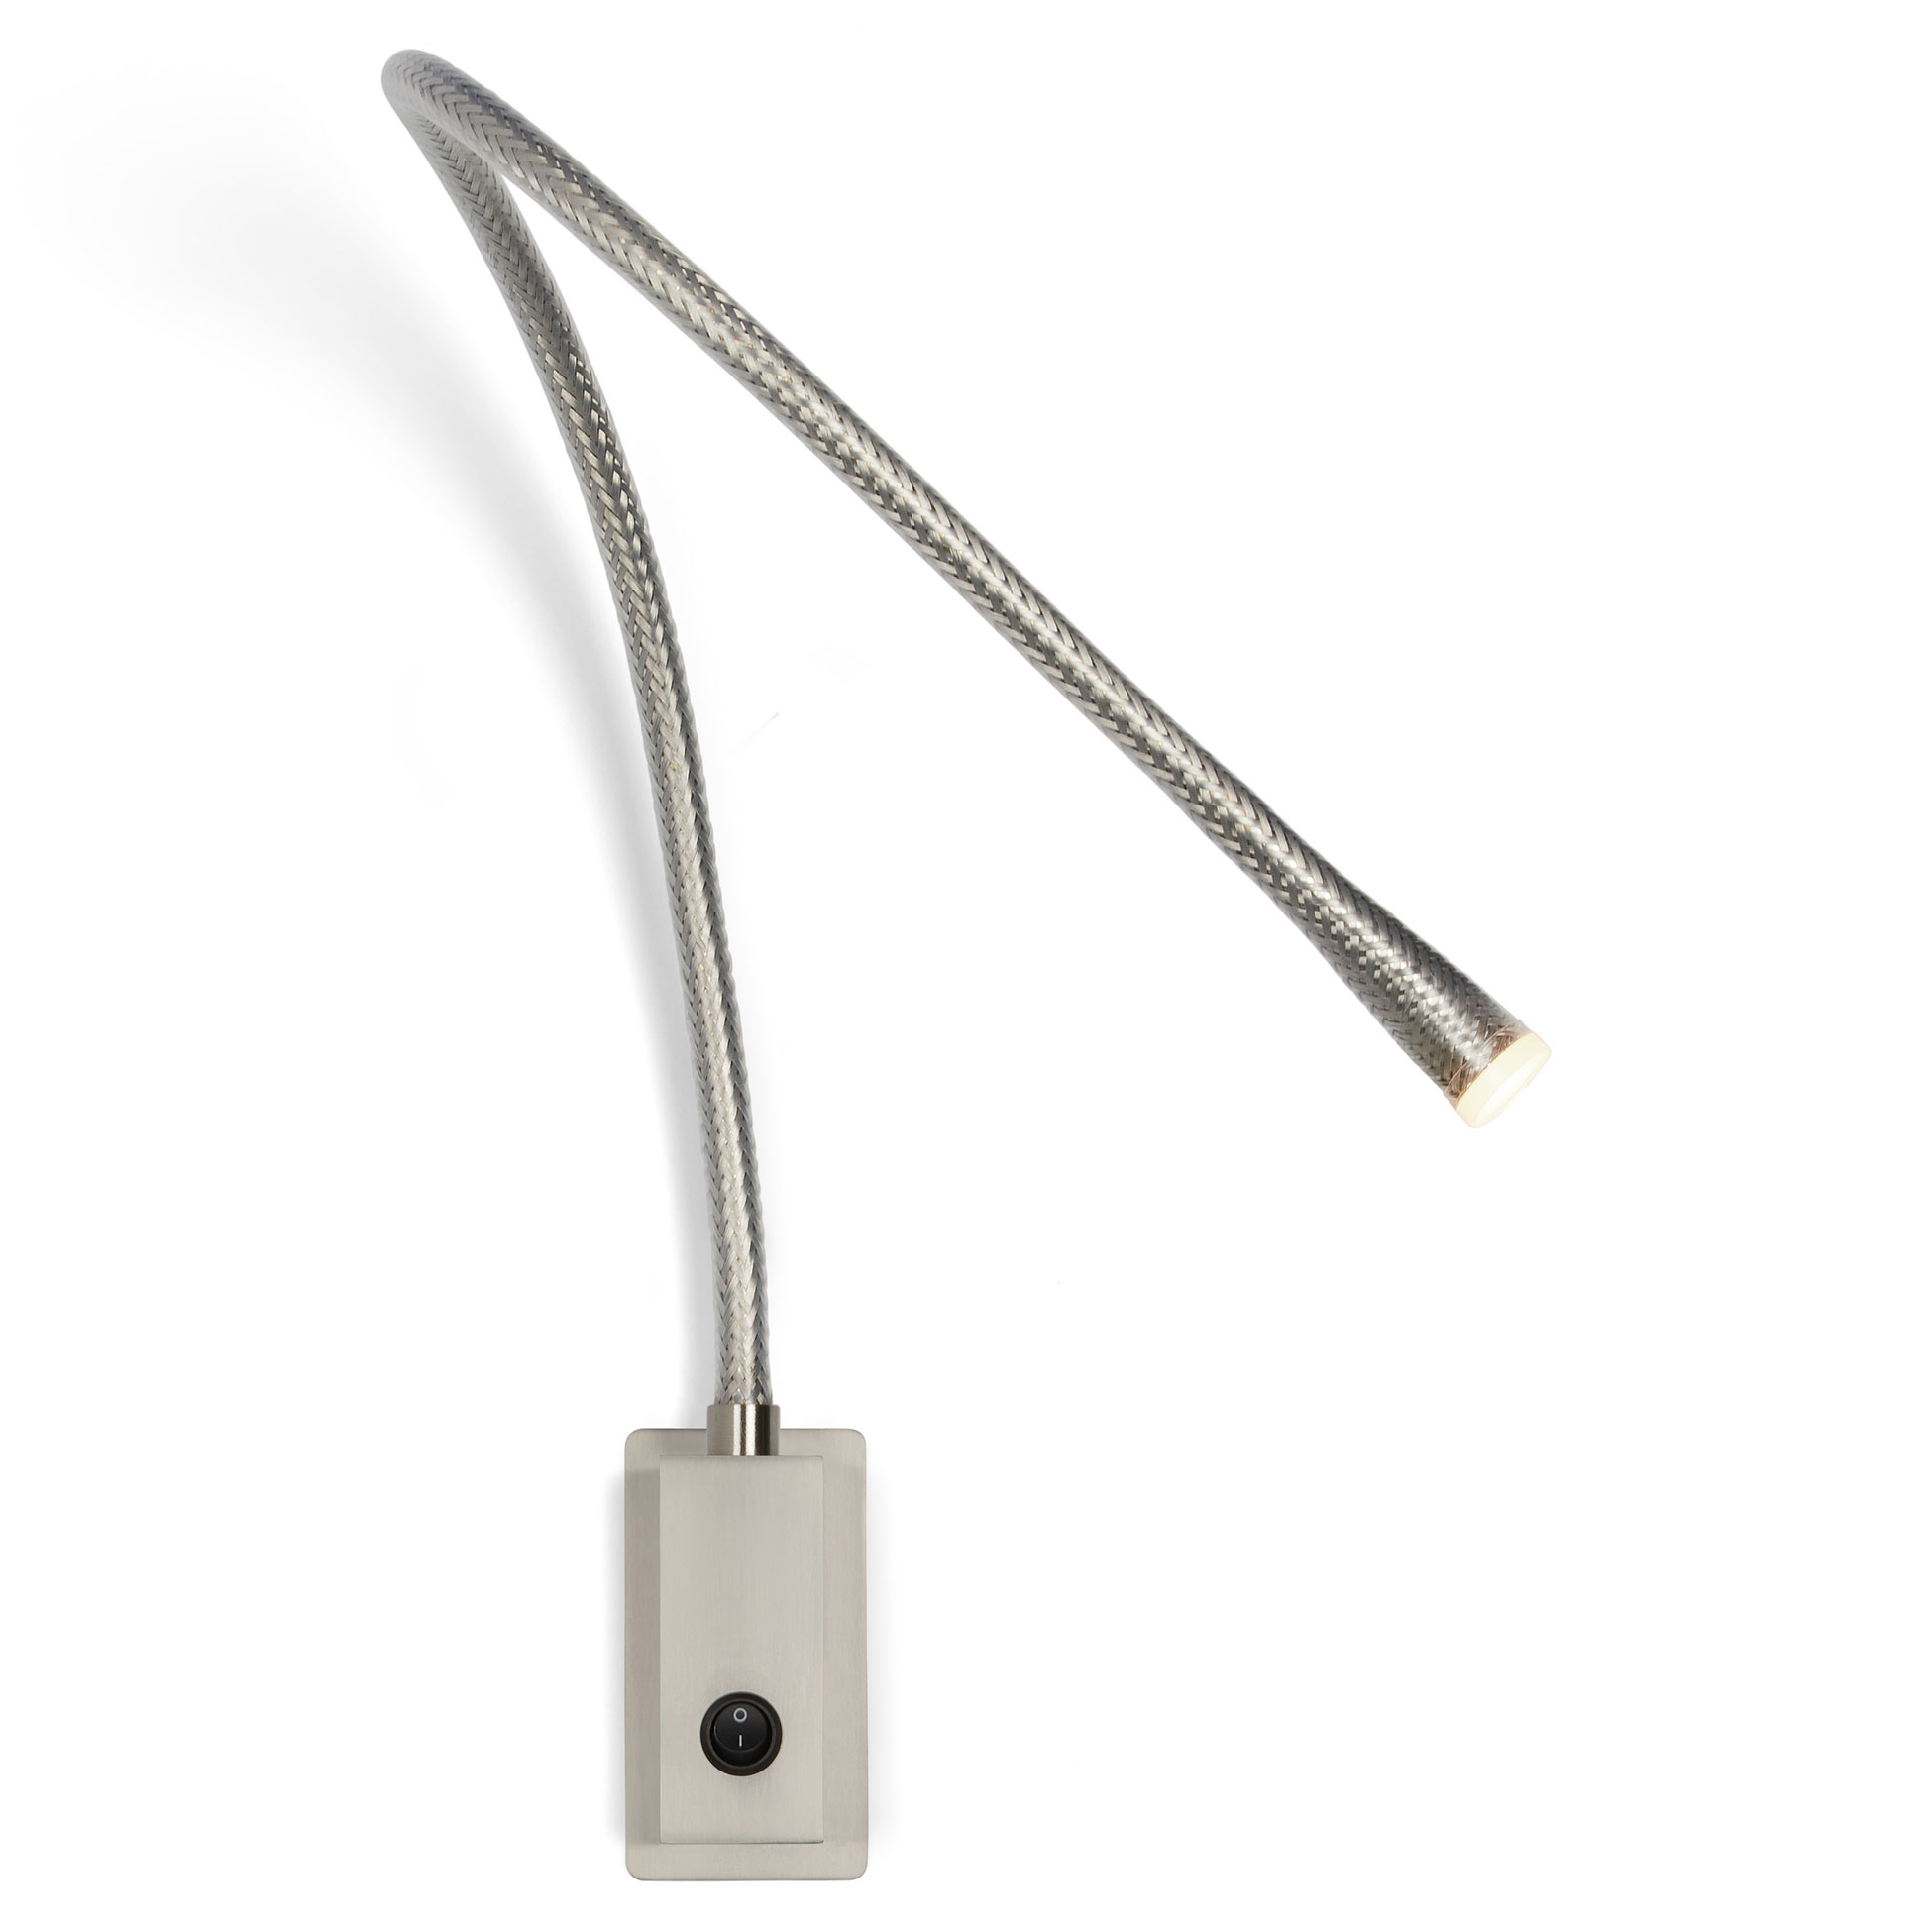 Flexiled Wall Reading Light by Contardi | ACAON.000191 | CDI1161837